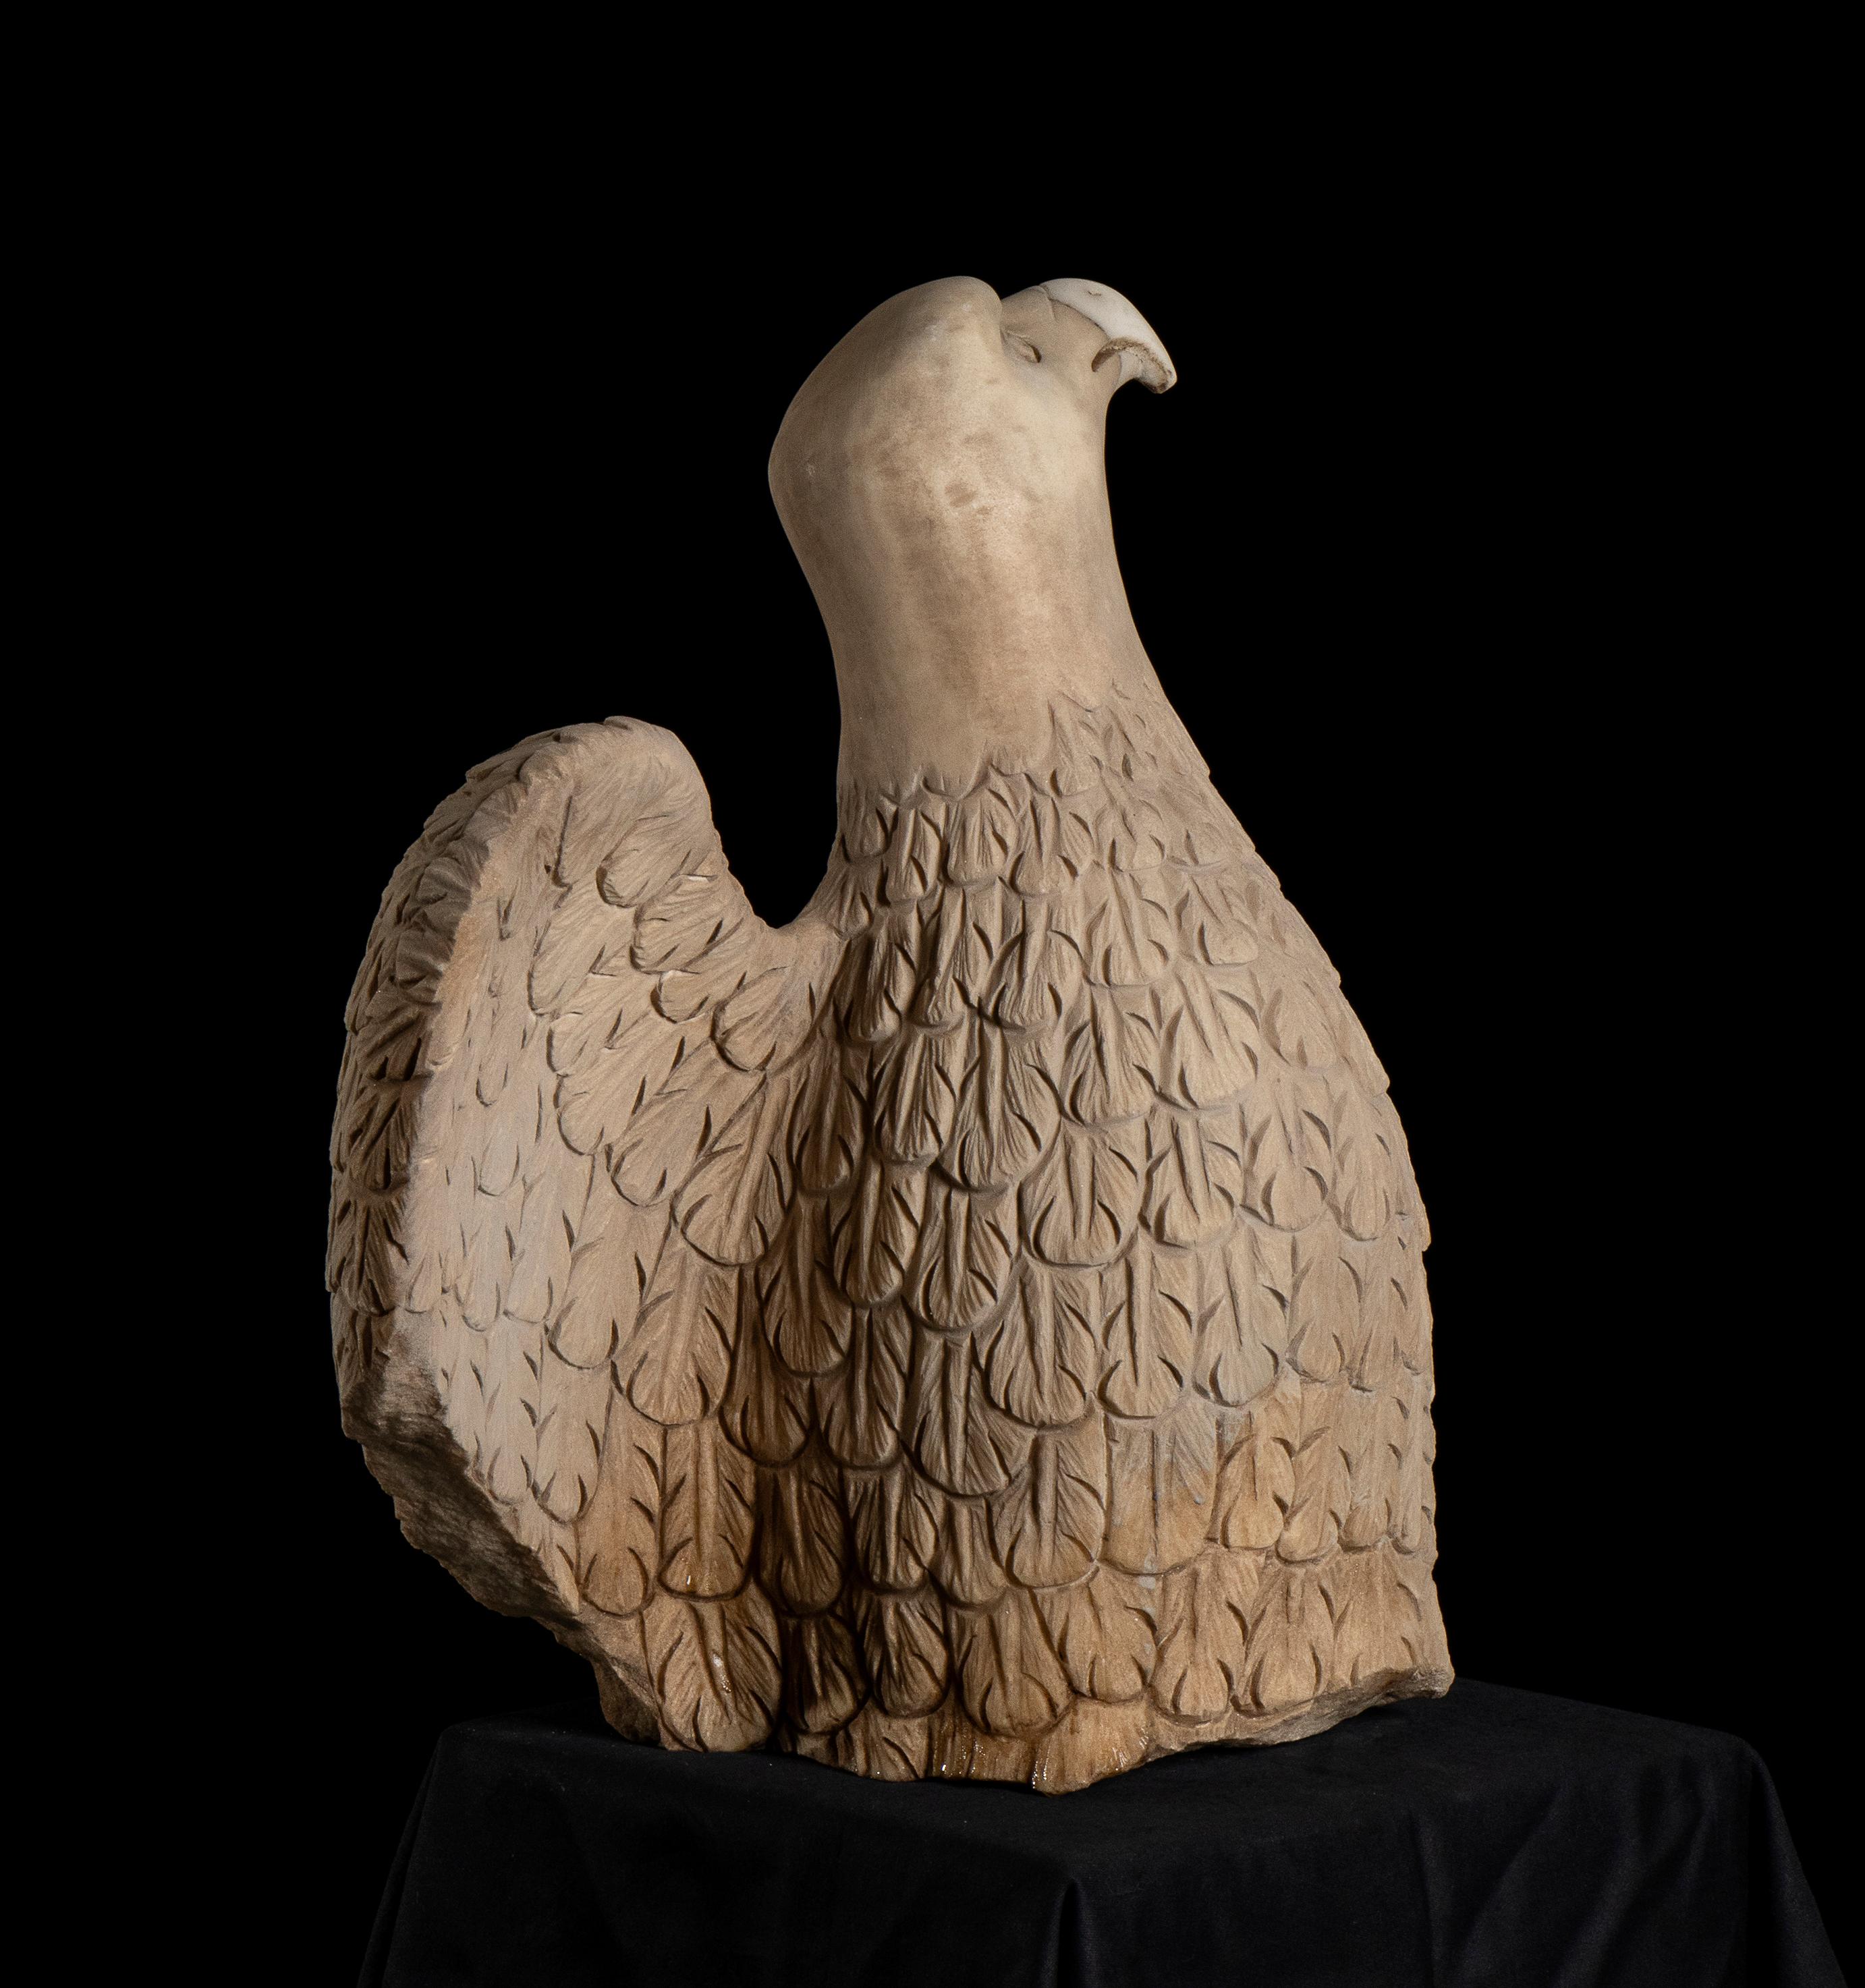 White Marble Sculpture of The Imperial Eagle, Symbol of the Roman Empire  - Black Figurative Sculpture by Unknown